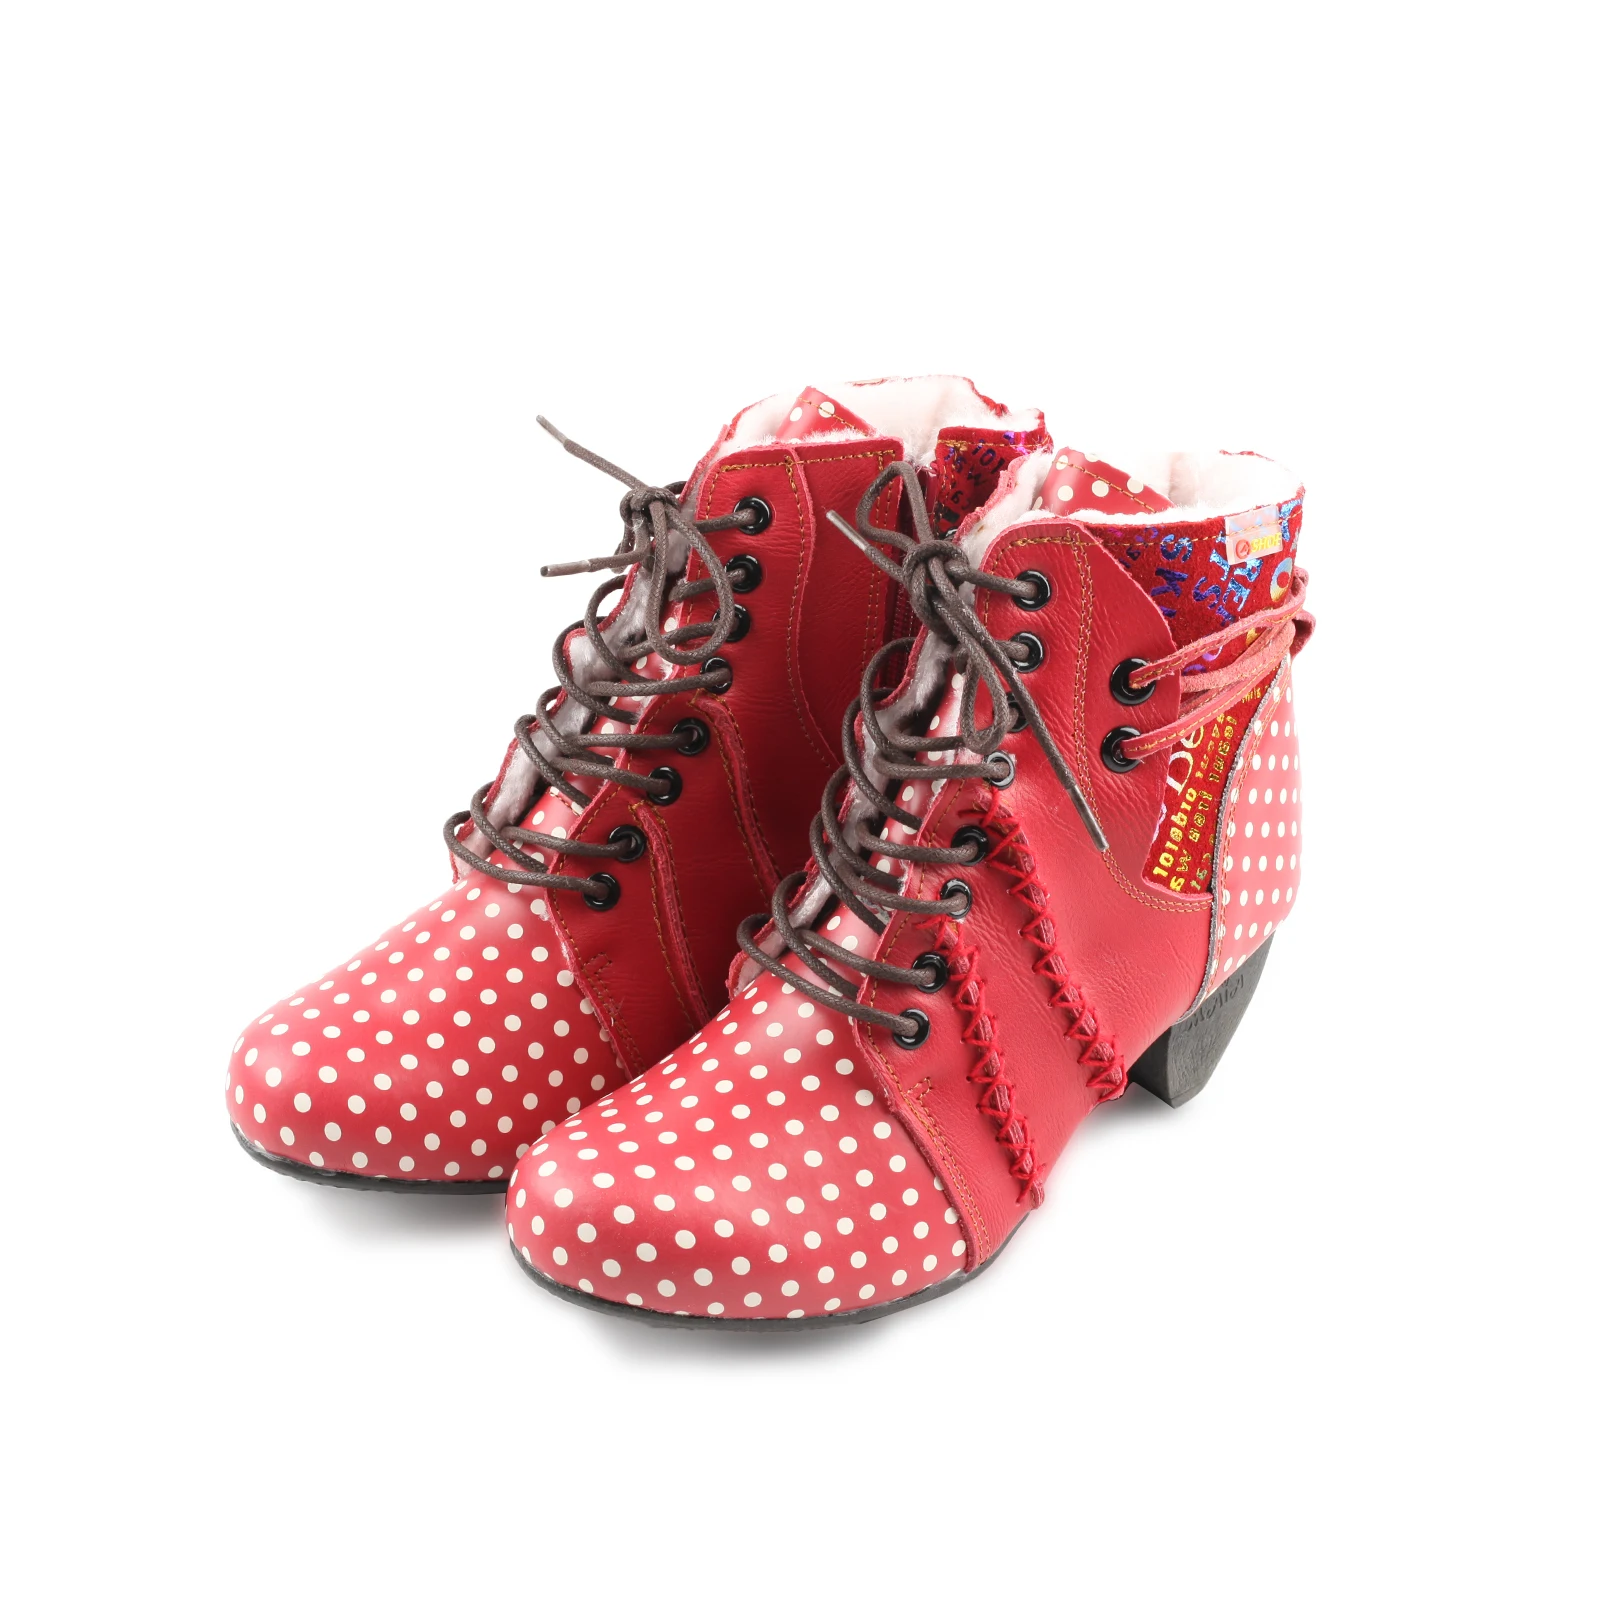 

SHOELANDER Winter Polka Dot Leather Women Boots with Warm Faux Fur lining and Moccasin Hand Stitching Fleece Version